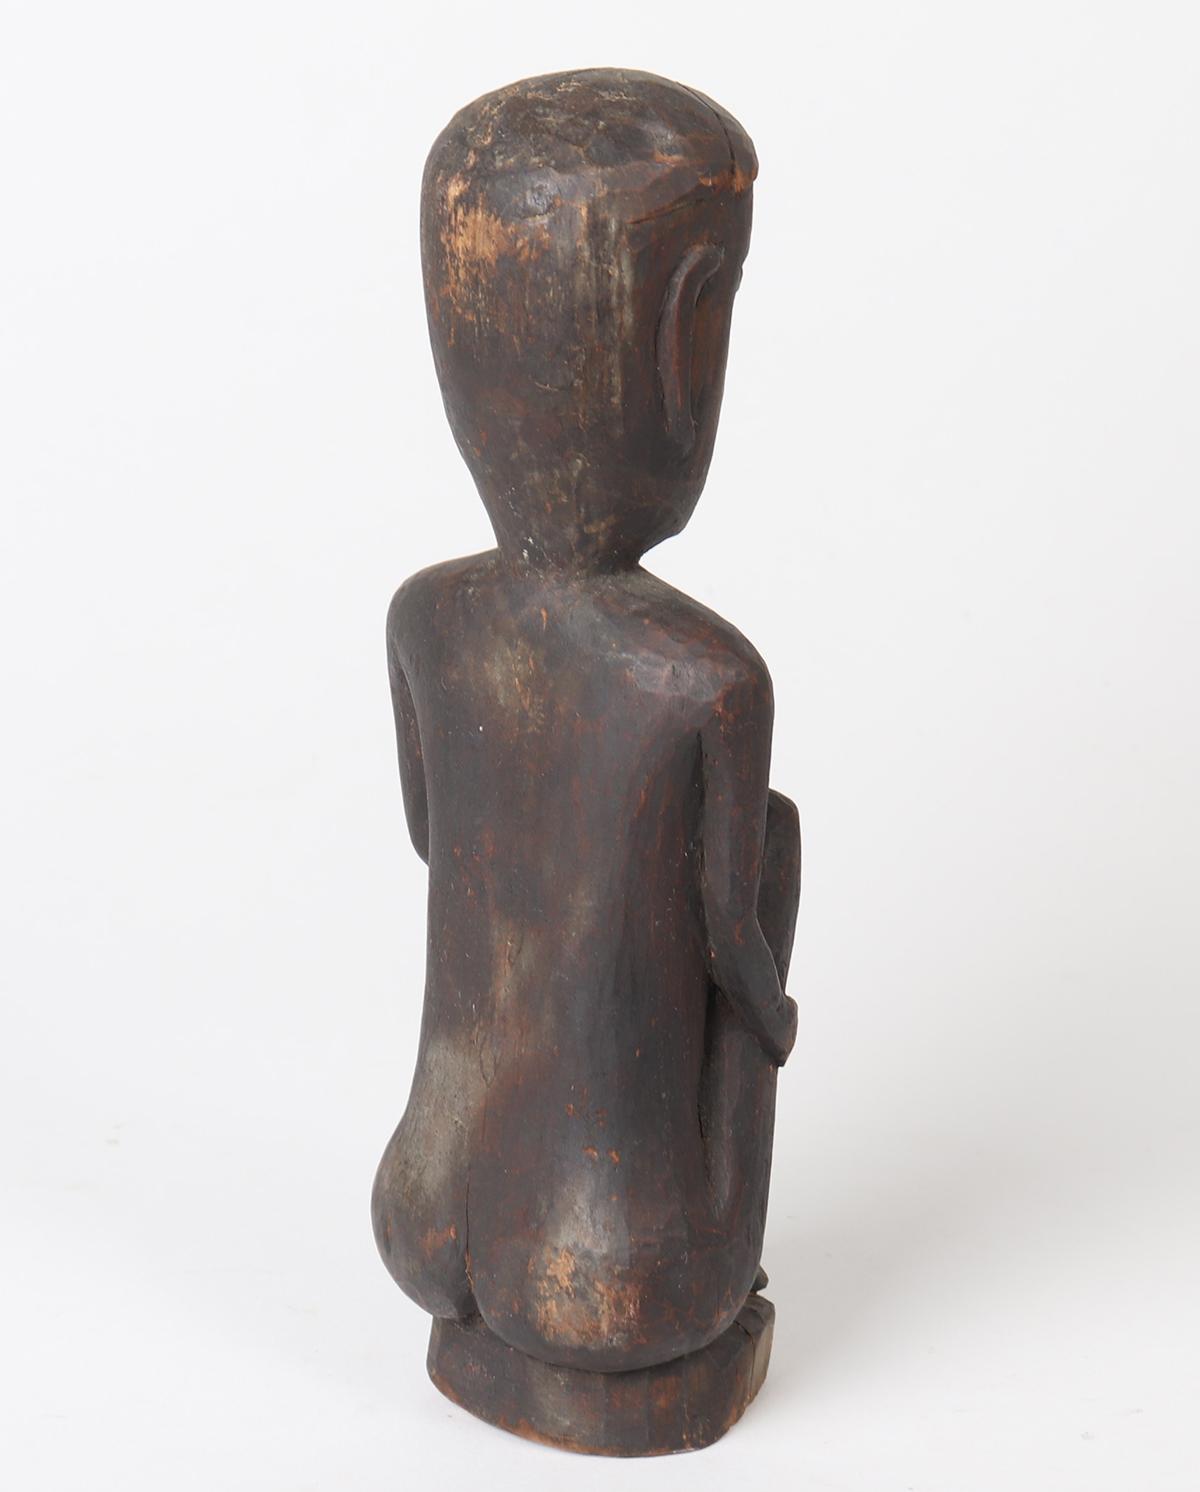 Seated Bulul Wood Carved Statue